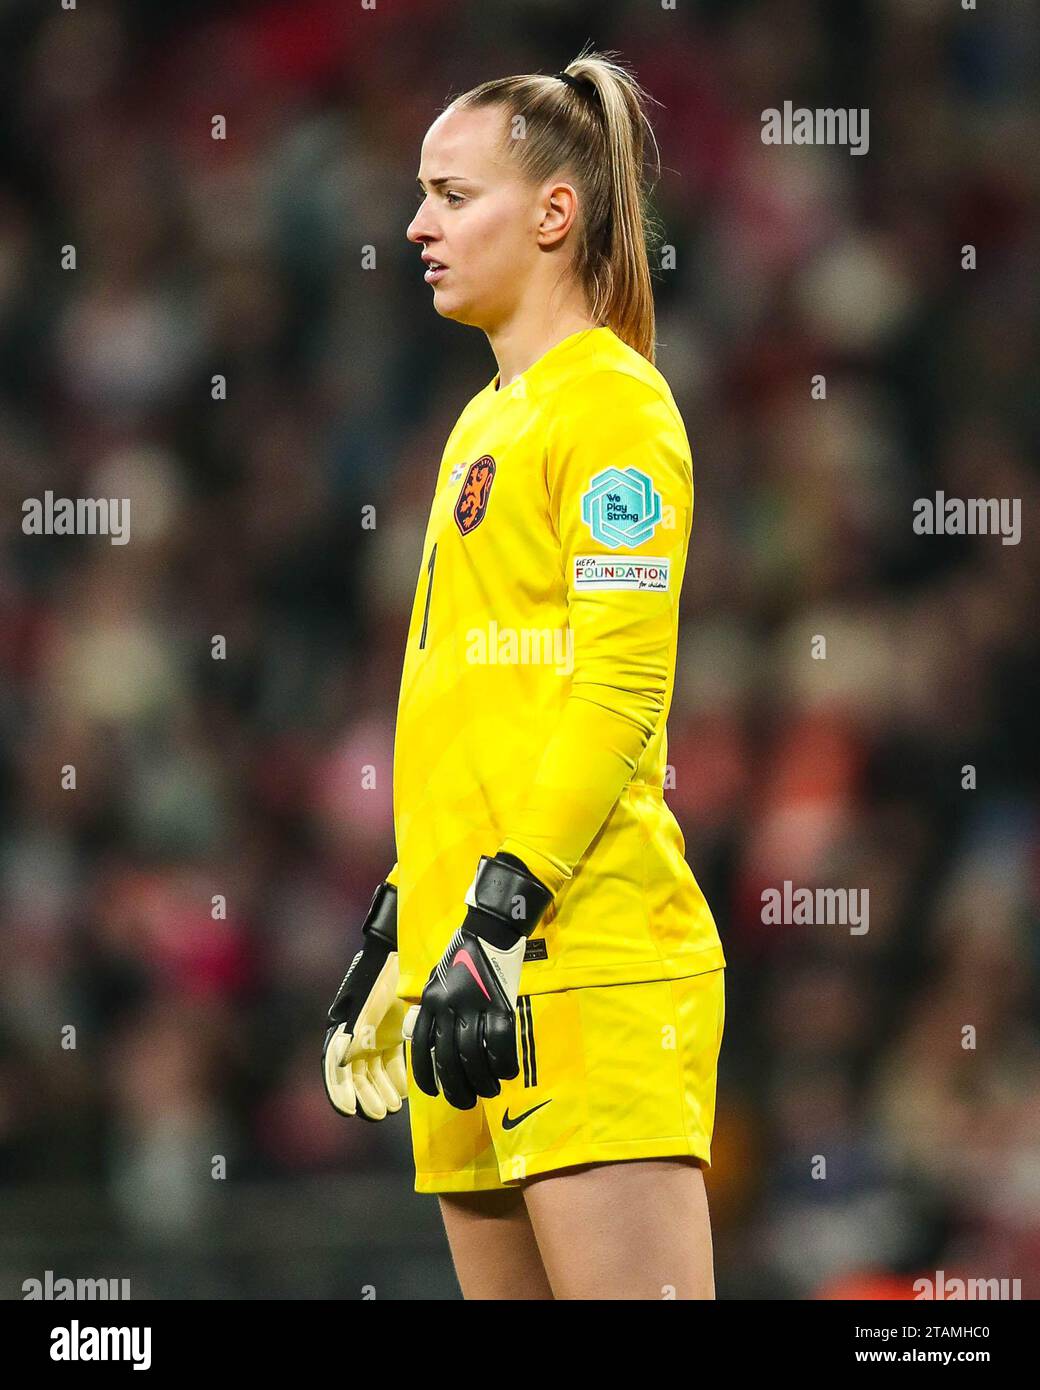 Netherlands\' goalkeeper soccer Daphne ball between 2022 match at during and Women Netherlands France\'s Euro Dominique Domselaar catches France Kadidiatou the and left, Netherlands\' Diani quarterfinals the Janssen, the of ahead van